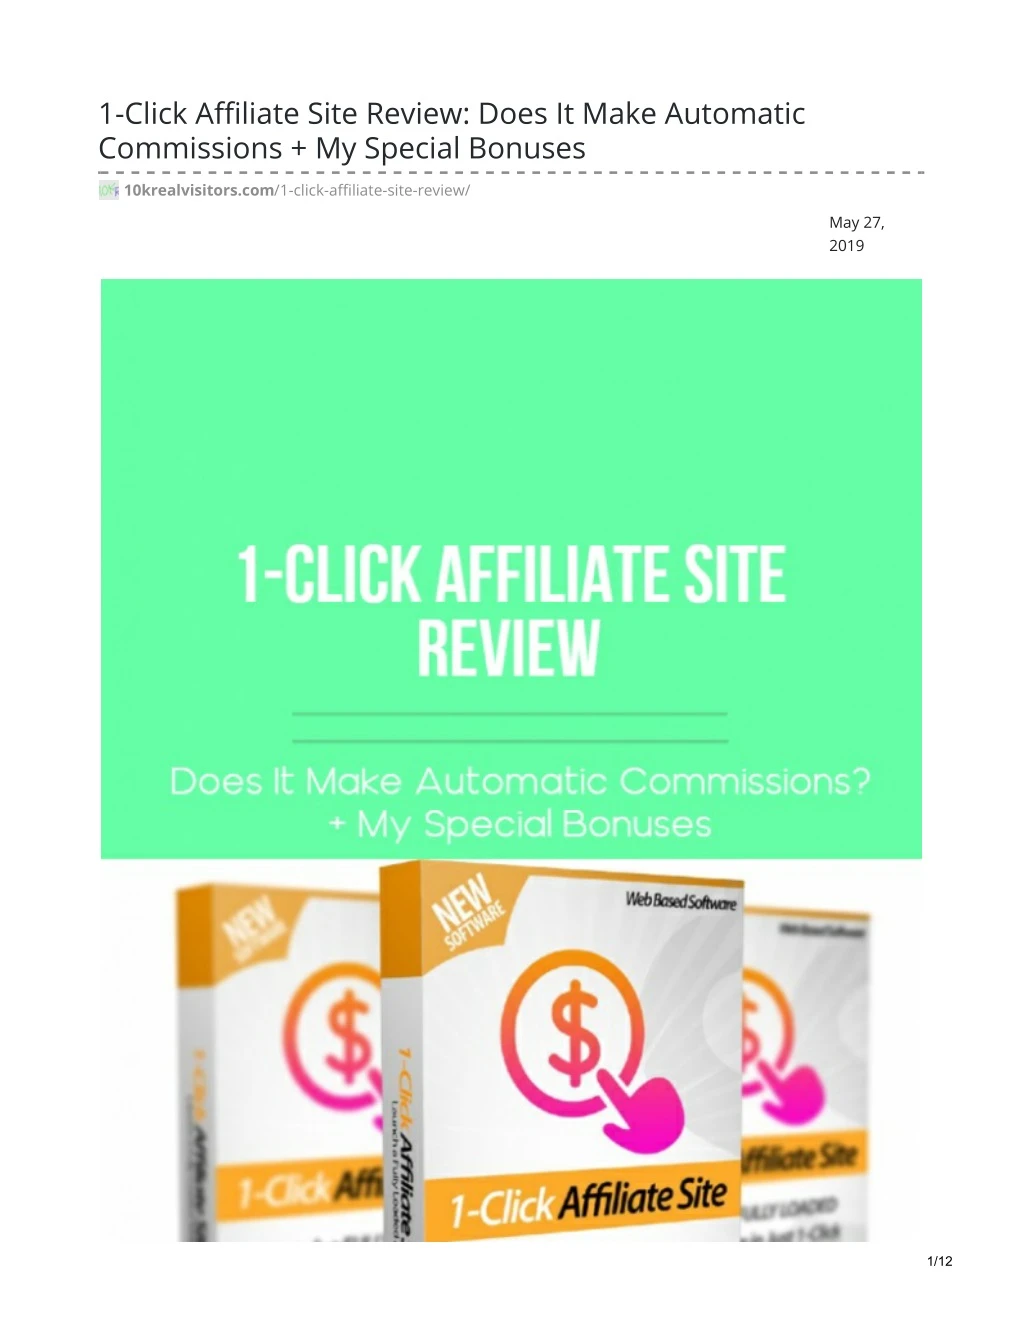 1 click affiliate site review does it make